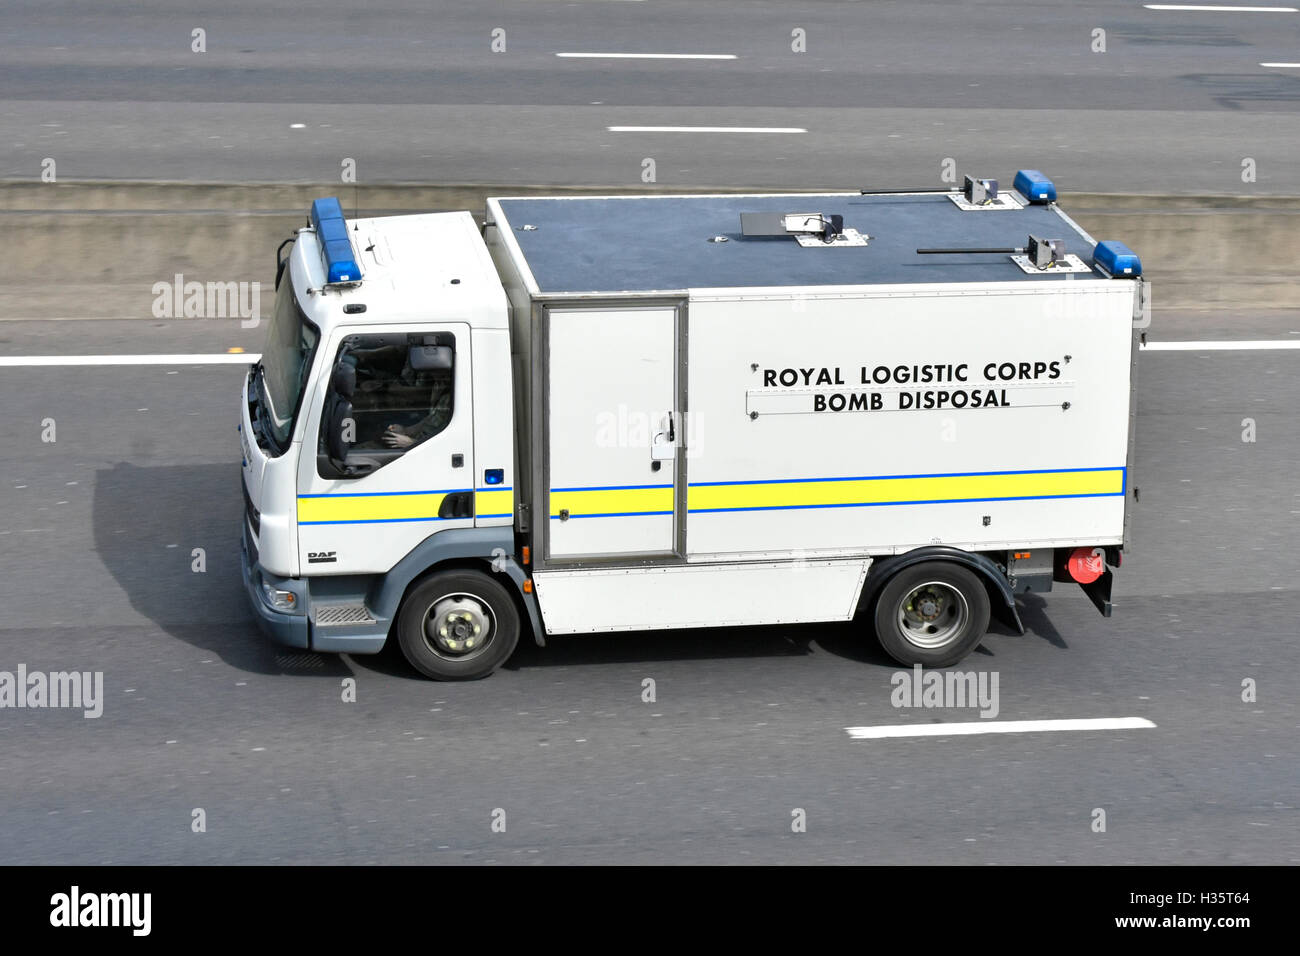 Royal Logistic Corps Bomb Disposal lorry English Uk motorway known to sometimes carry robot bomb detecting devices used on suspicious packages Essex Stock Photo